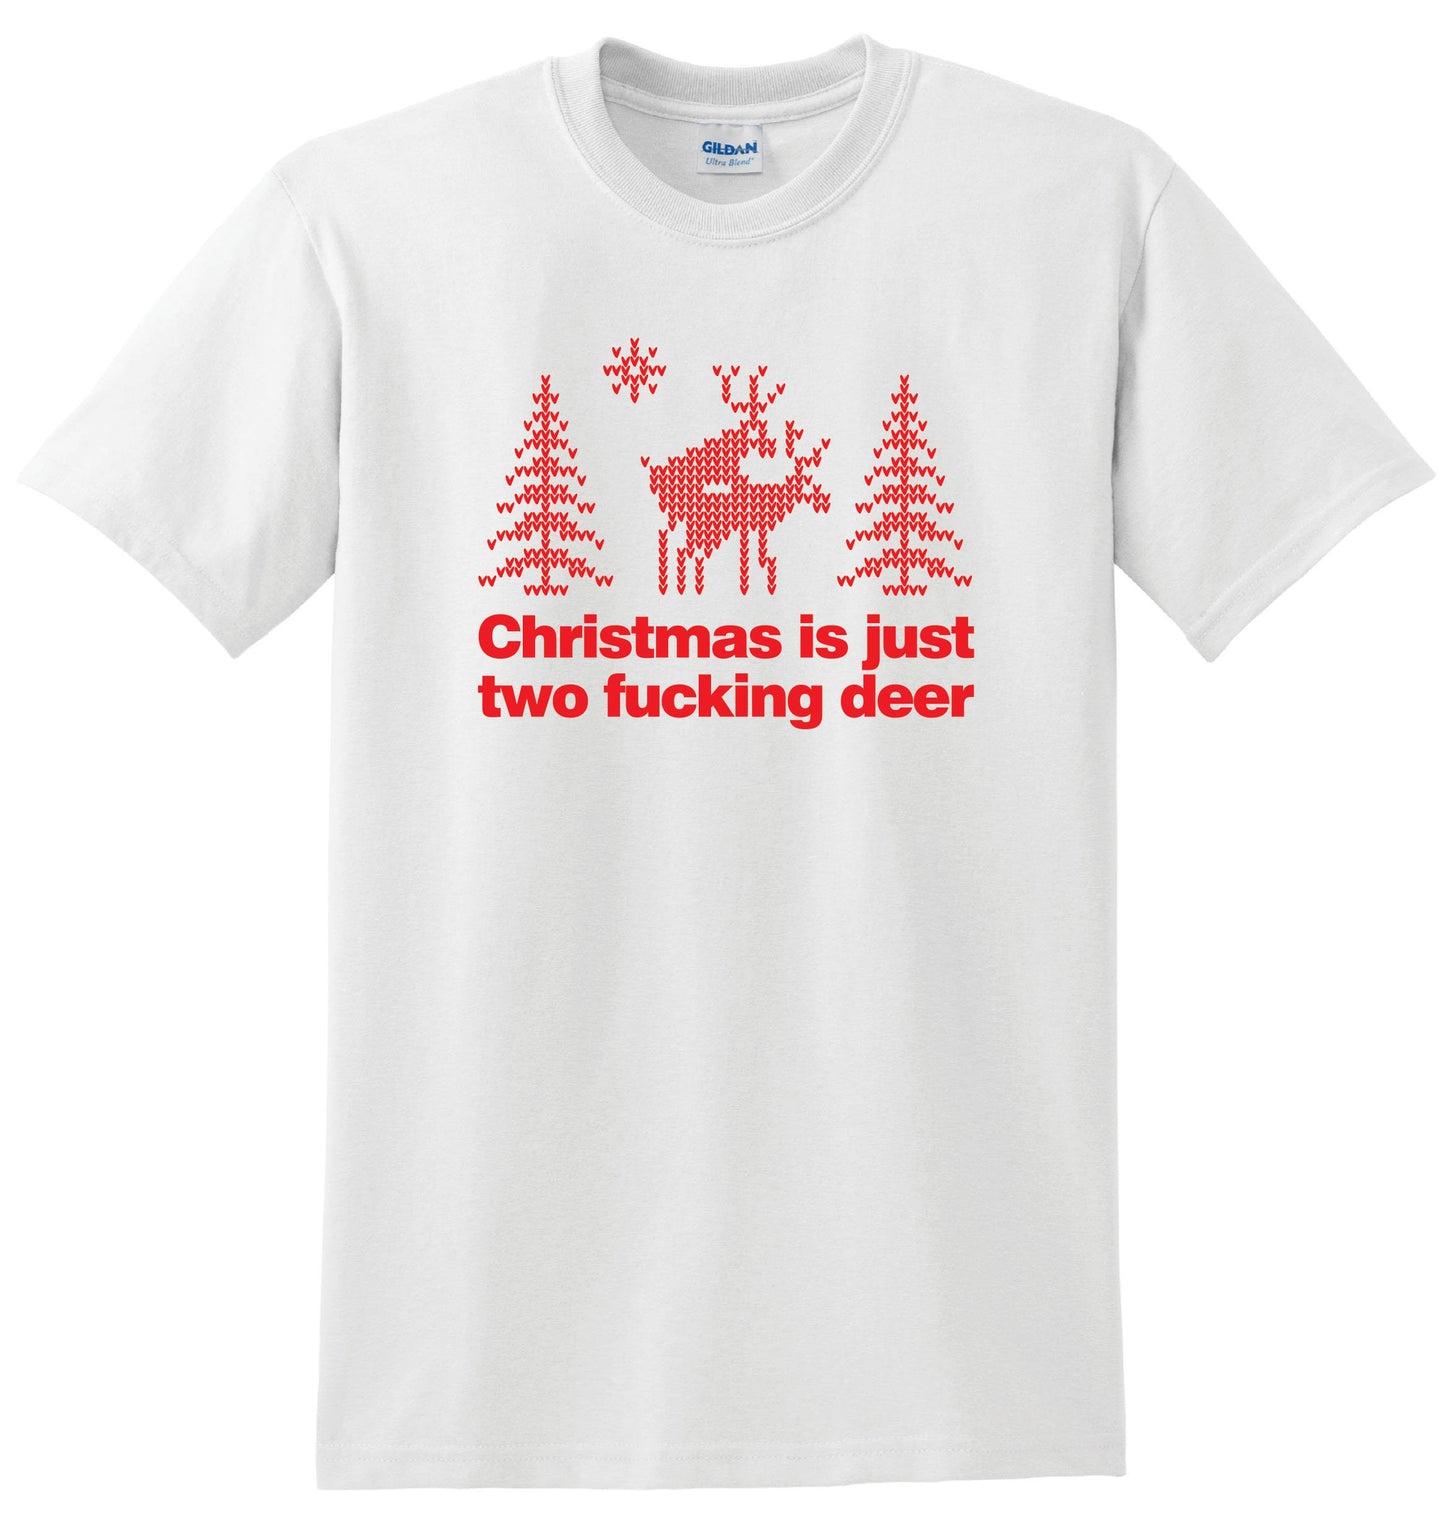 Christmas Is Just Two F***ing Deer T-shirt -Xmas Christmas Funny Cool Ladies or Mens (unisex)